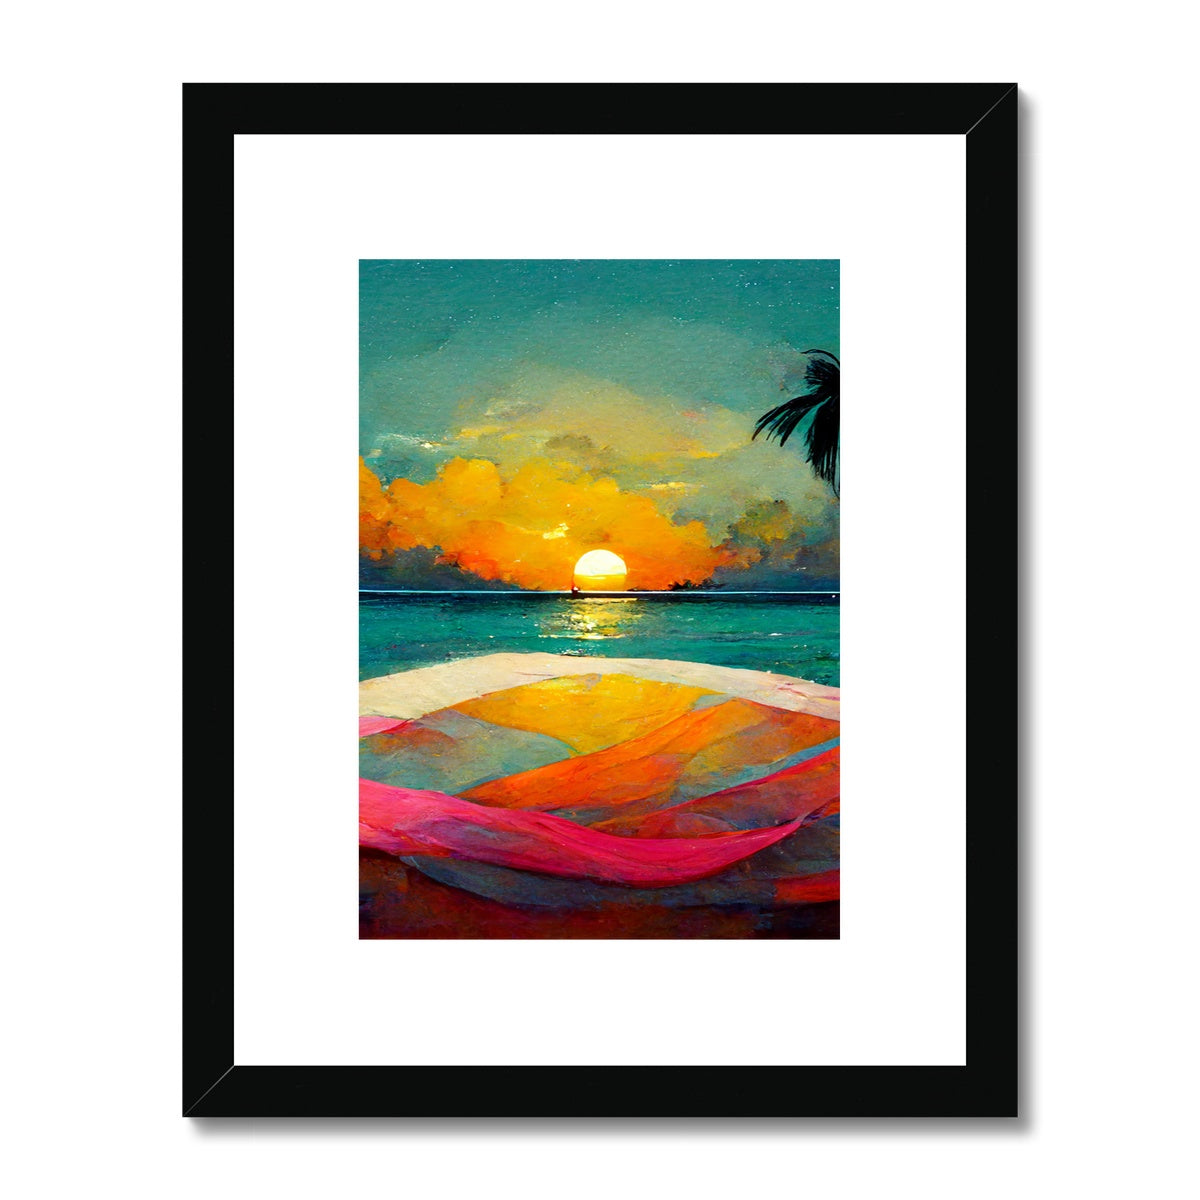 On The Horizon Framed & Mounted Print